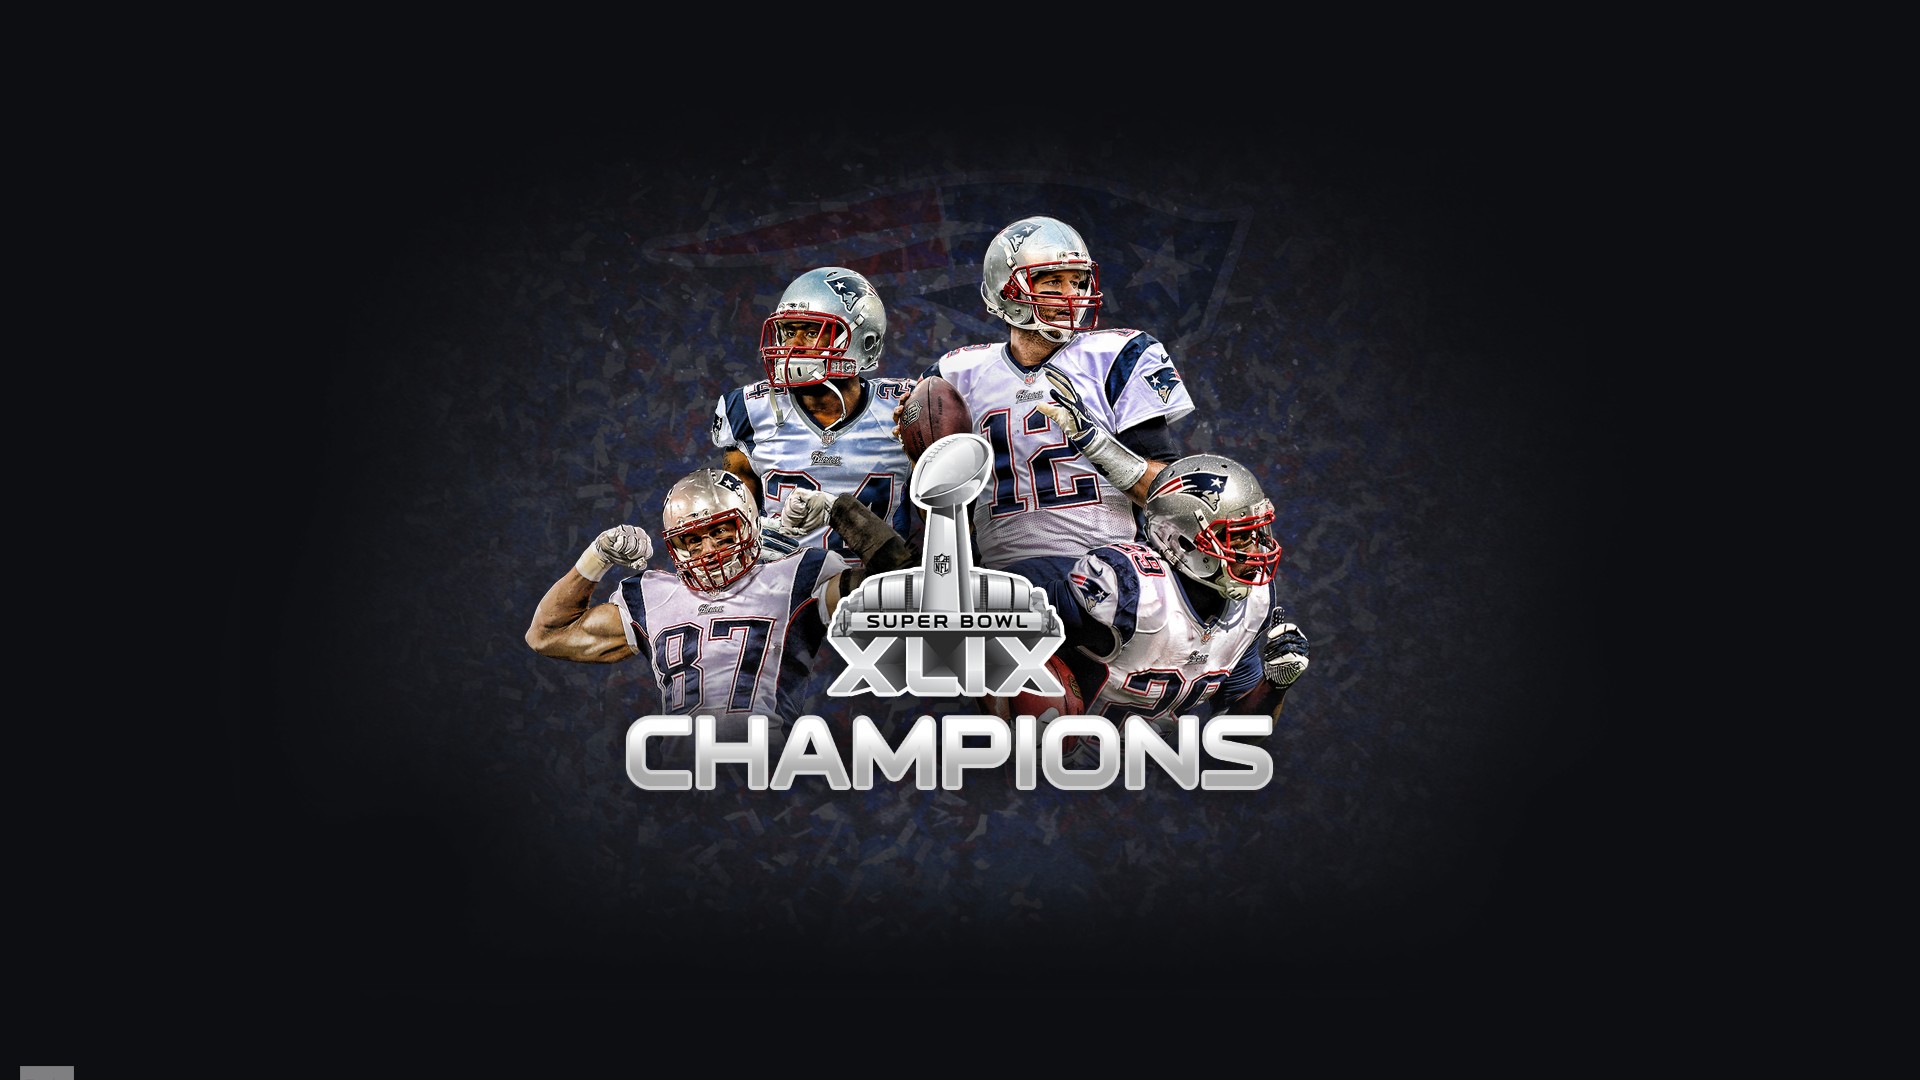 HD New England Patriots Backgrounds with resolution 1920x1080 pixel. You can make this wallpaper for your Mac or Windows Desktop Background, iPhone, Android or Tablet and another Smartphone device